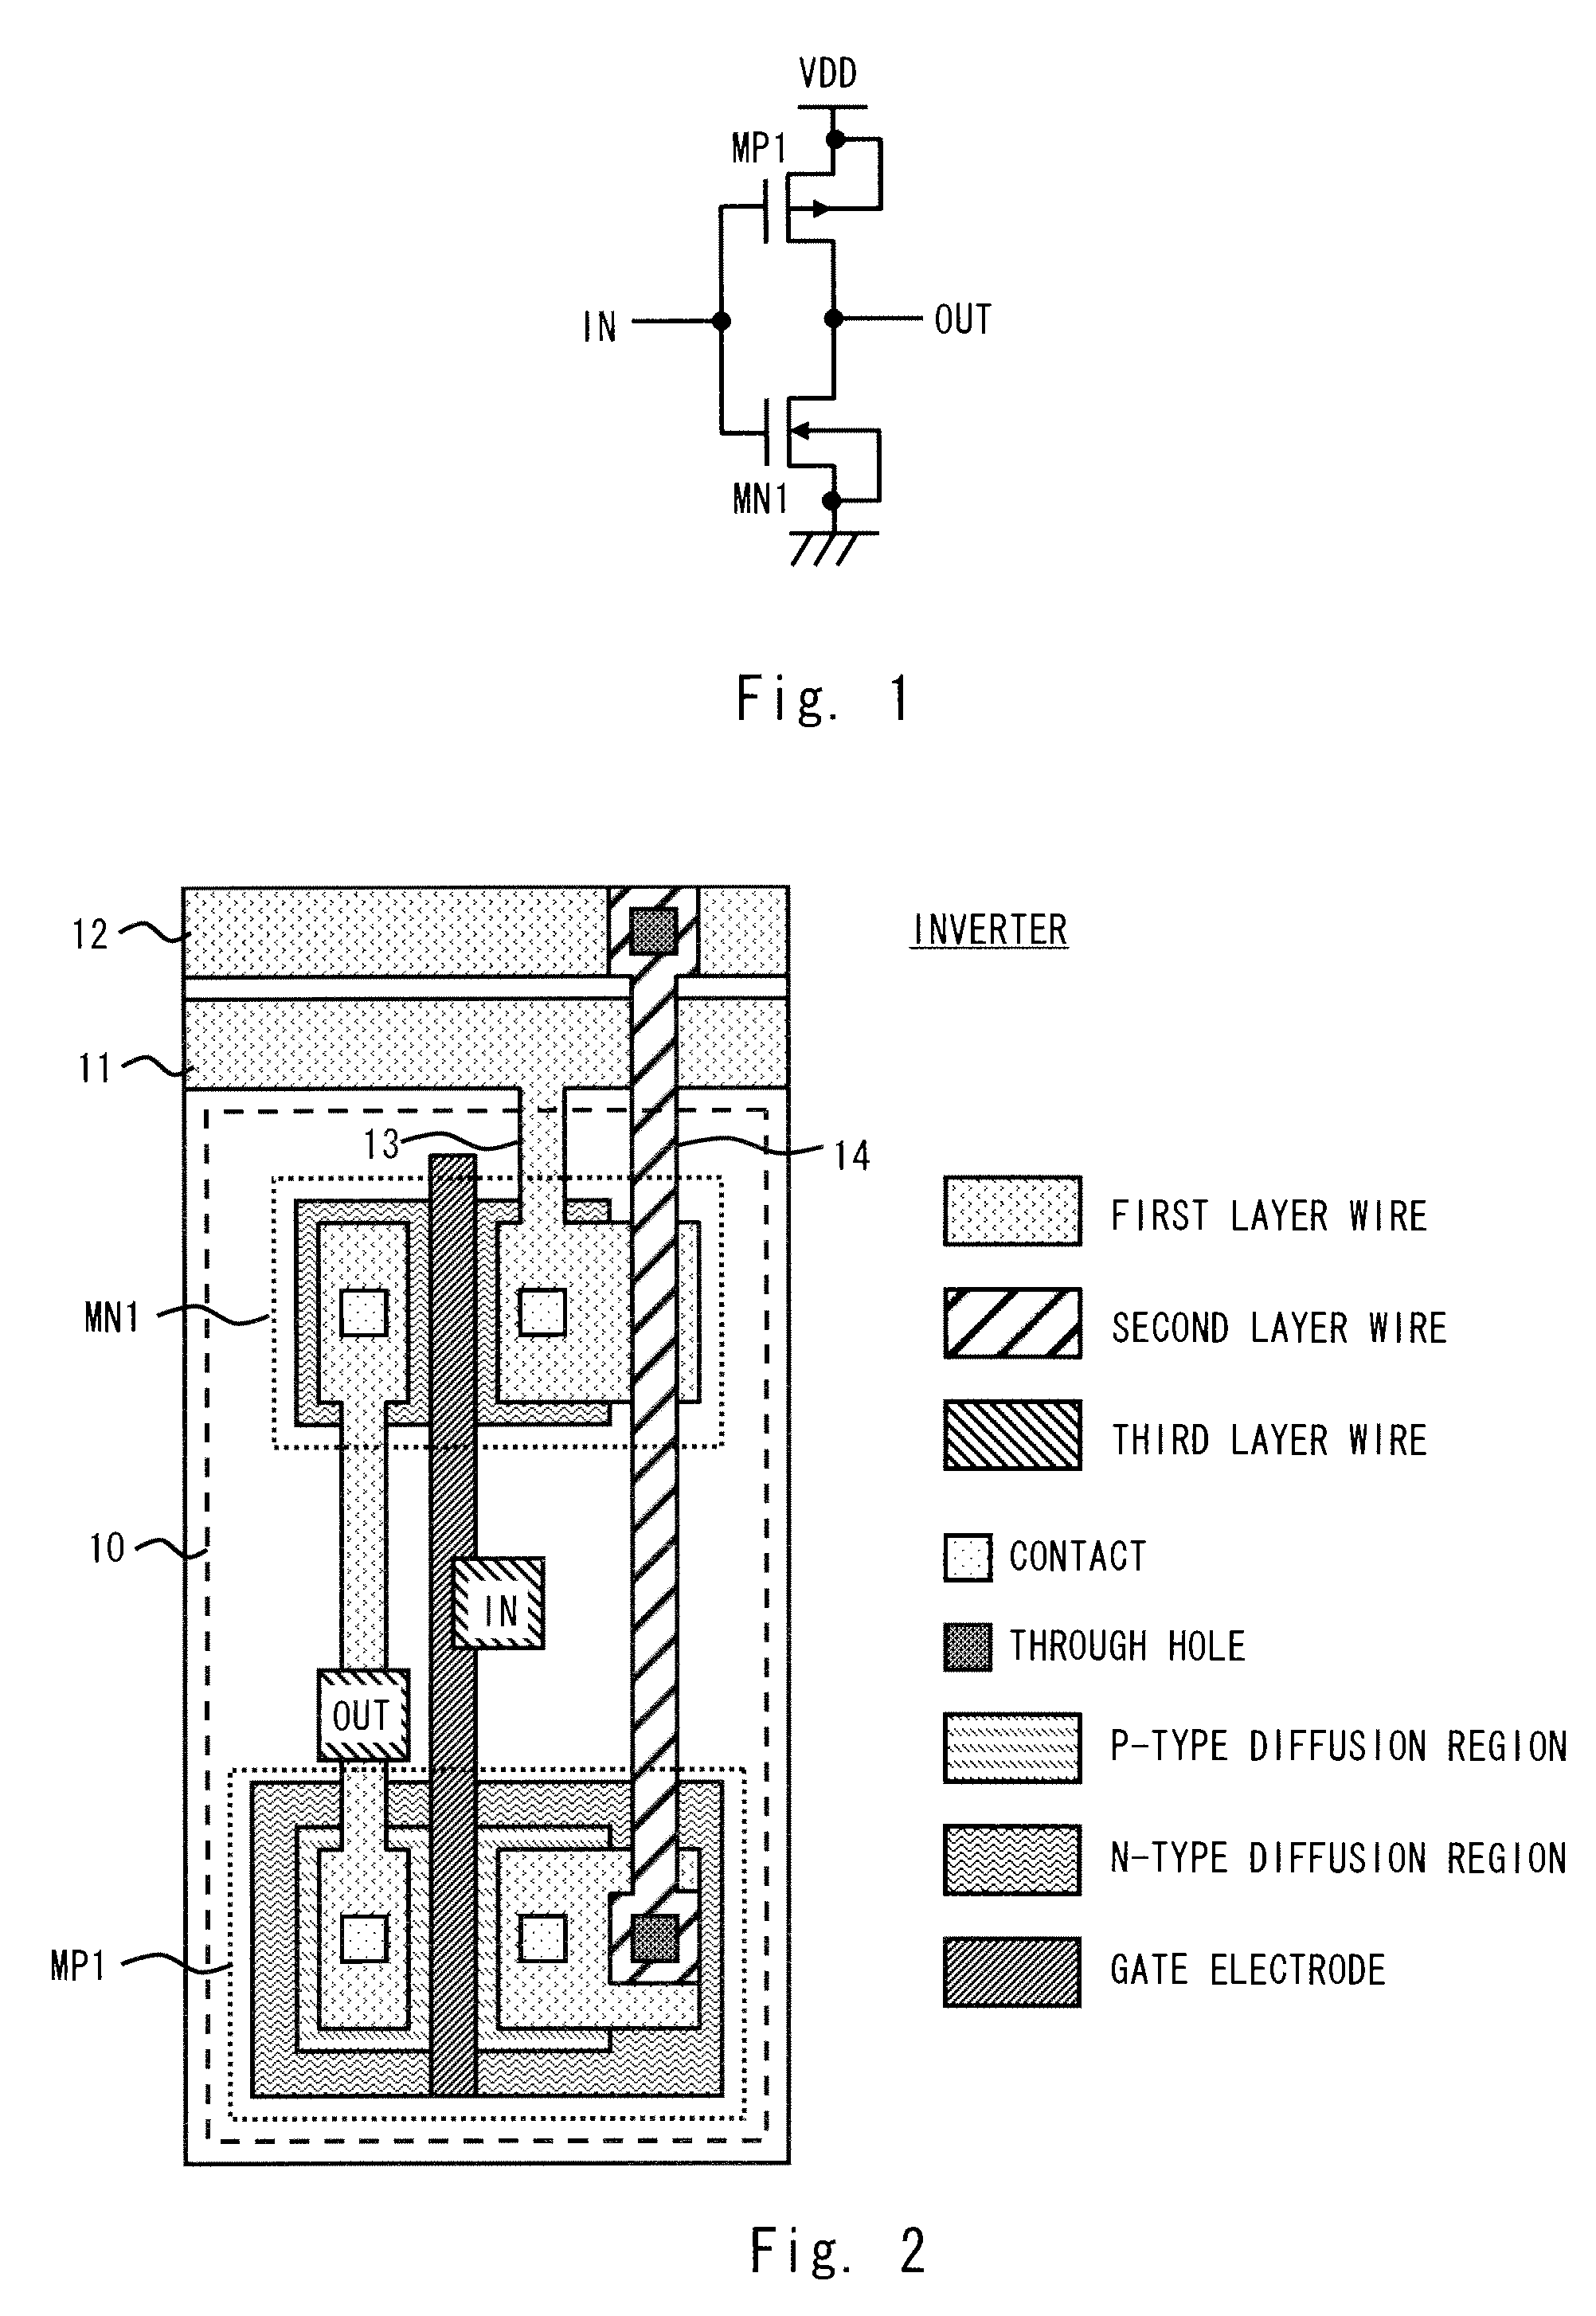 Primitive cell and semiconductor device